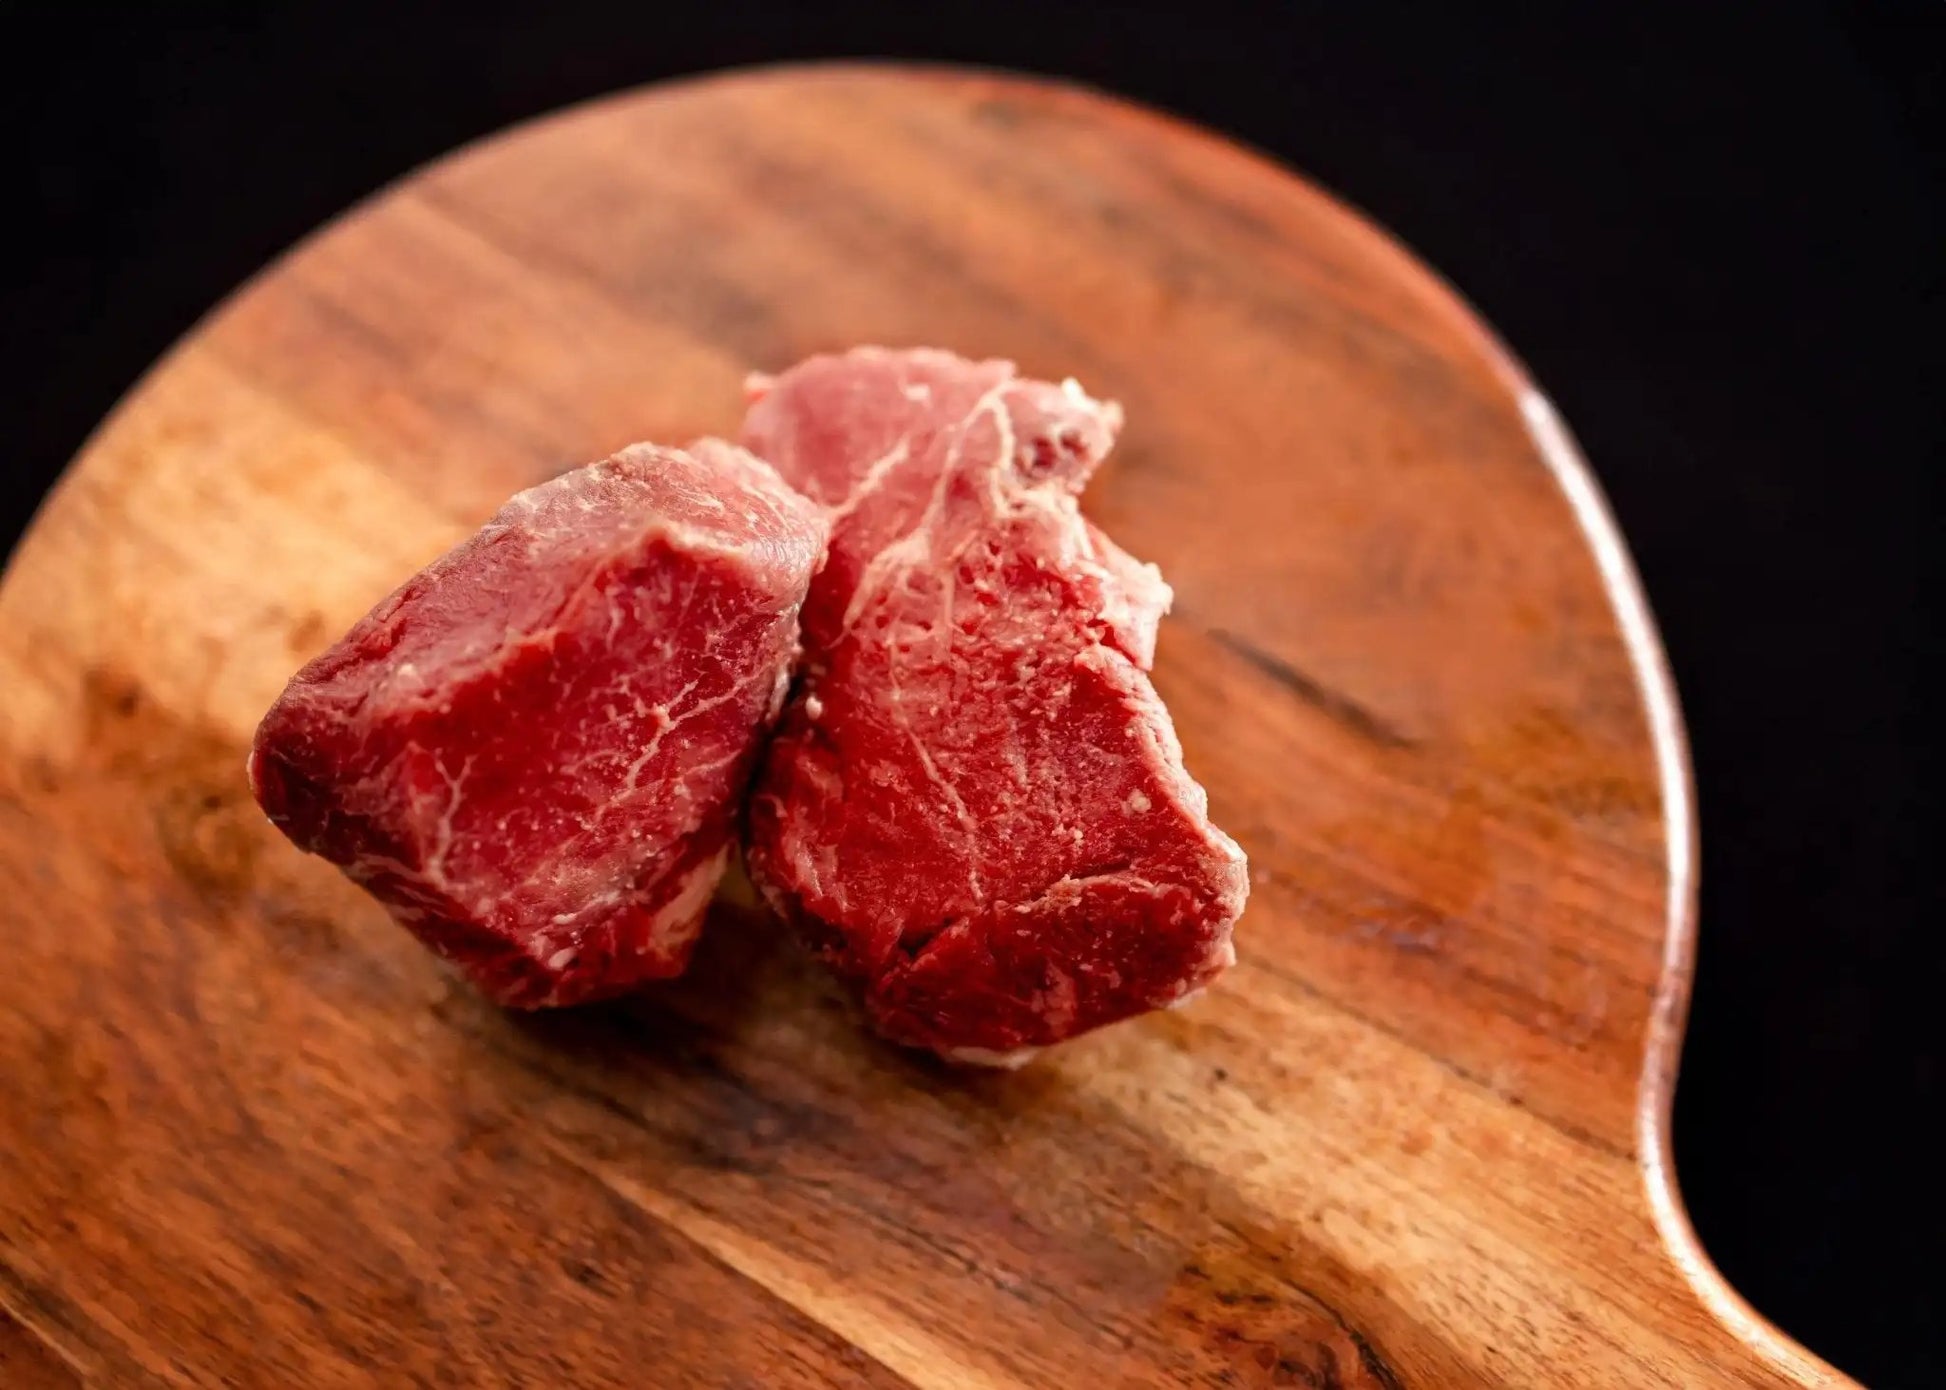 Rancher's Reserve Grass-Fed Wagyu Beef BoxThe Rancher's Reserve Beef Box is a premium selection of high-quality beef cuts sourced from our ranch that prioritizes sustainable and ethical farming practices. ThRancher'The Hufeisen-Ranch (WYO Wagyu)